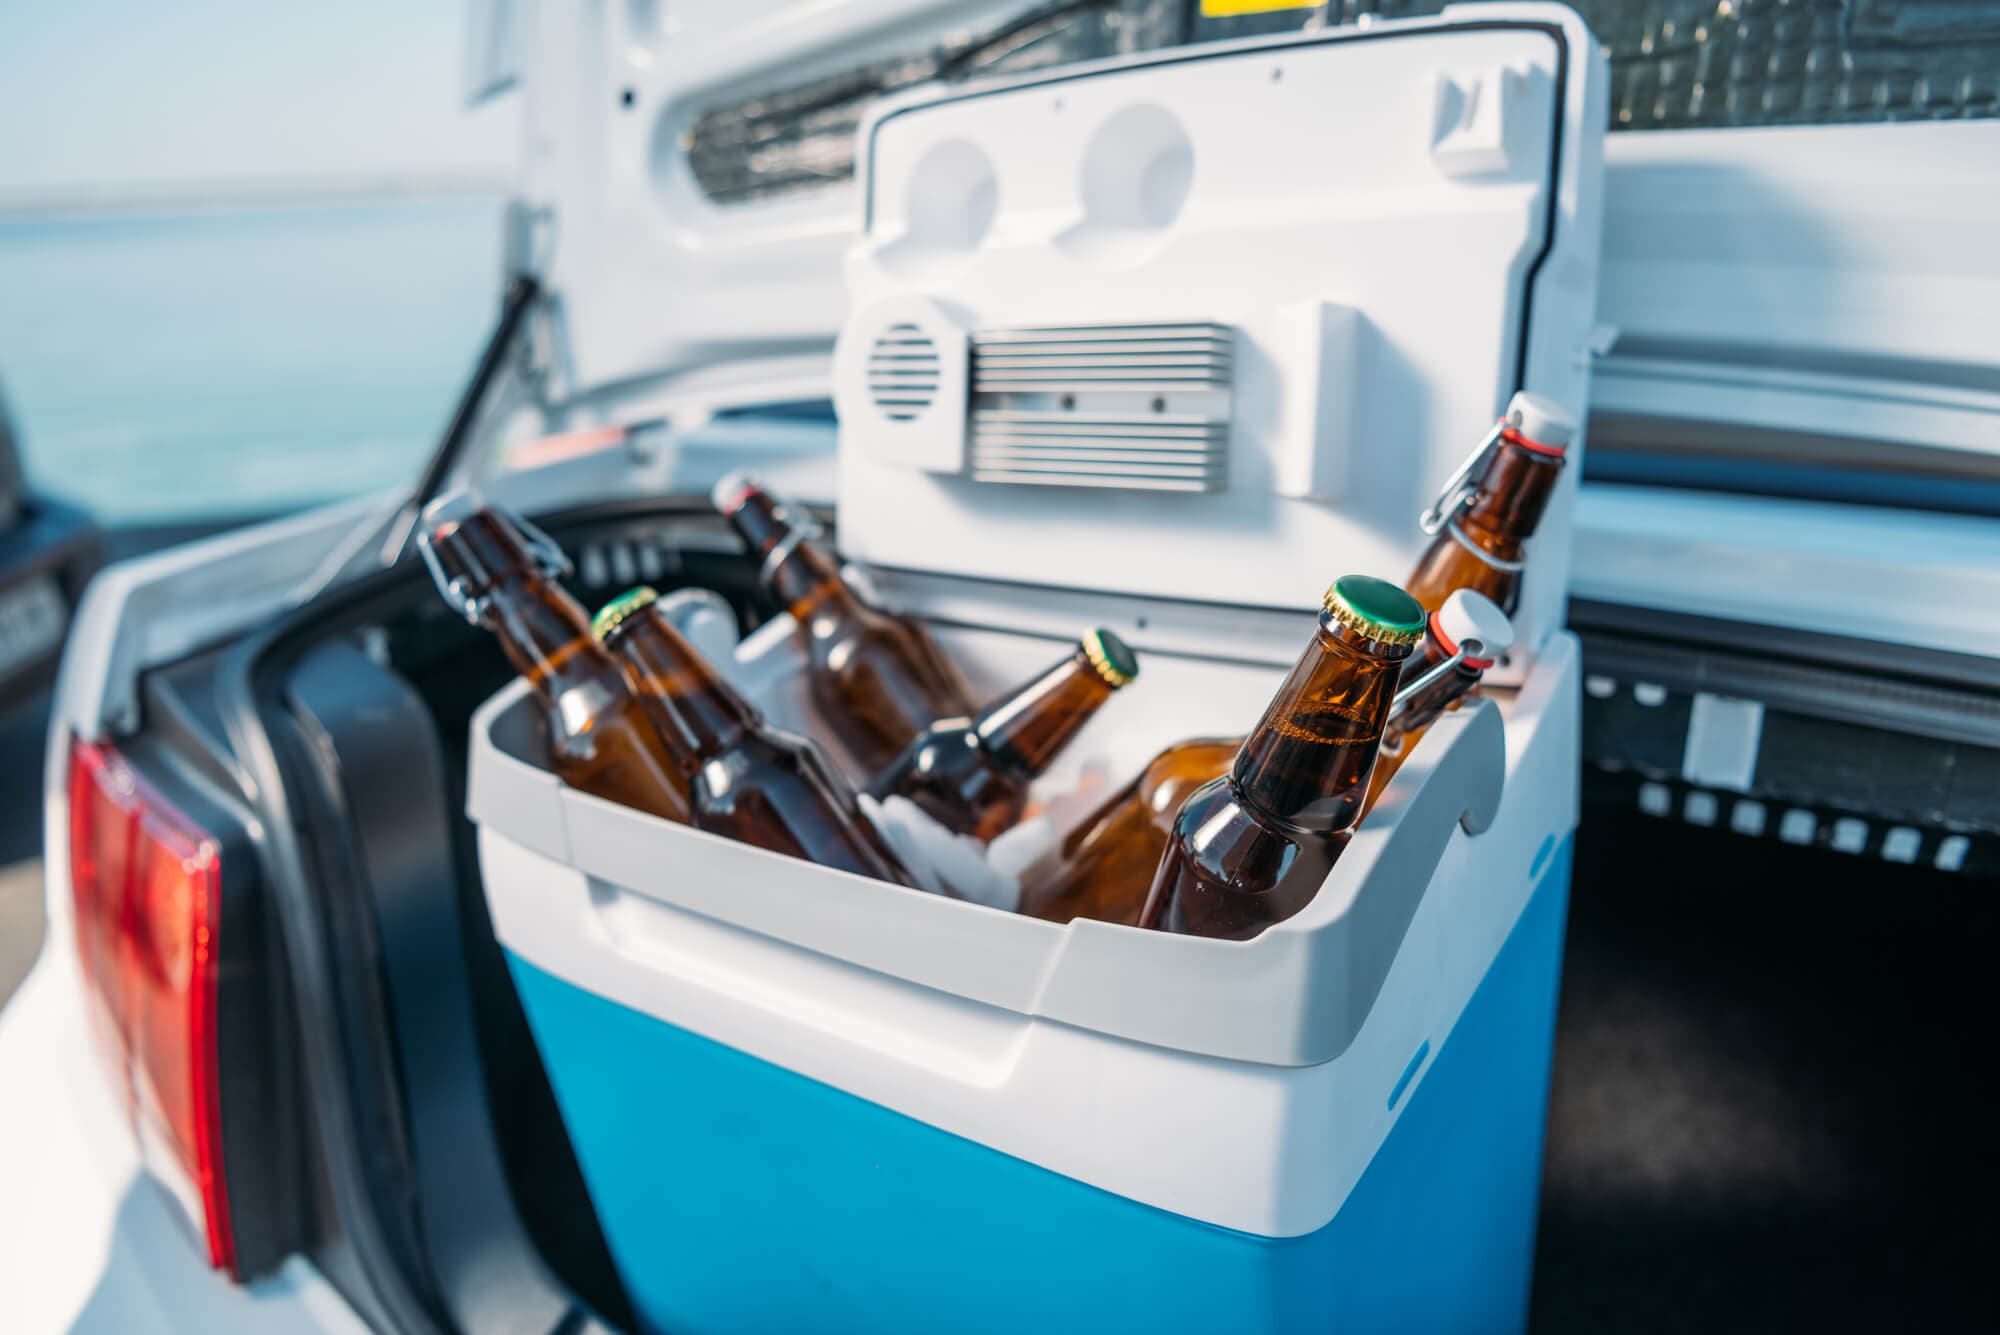 Best Car Coolers: Keep Snacks Cold on a Hot Day